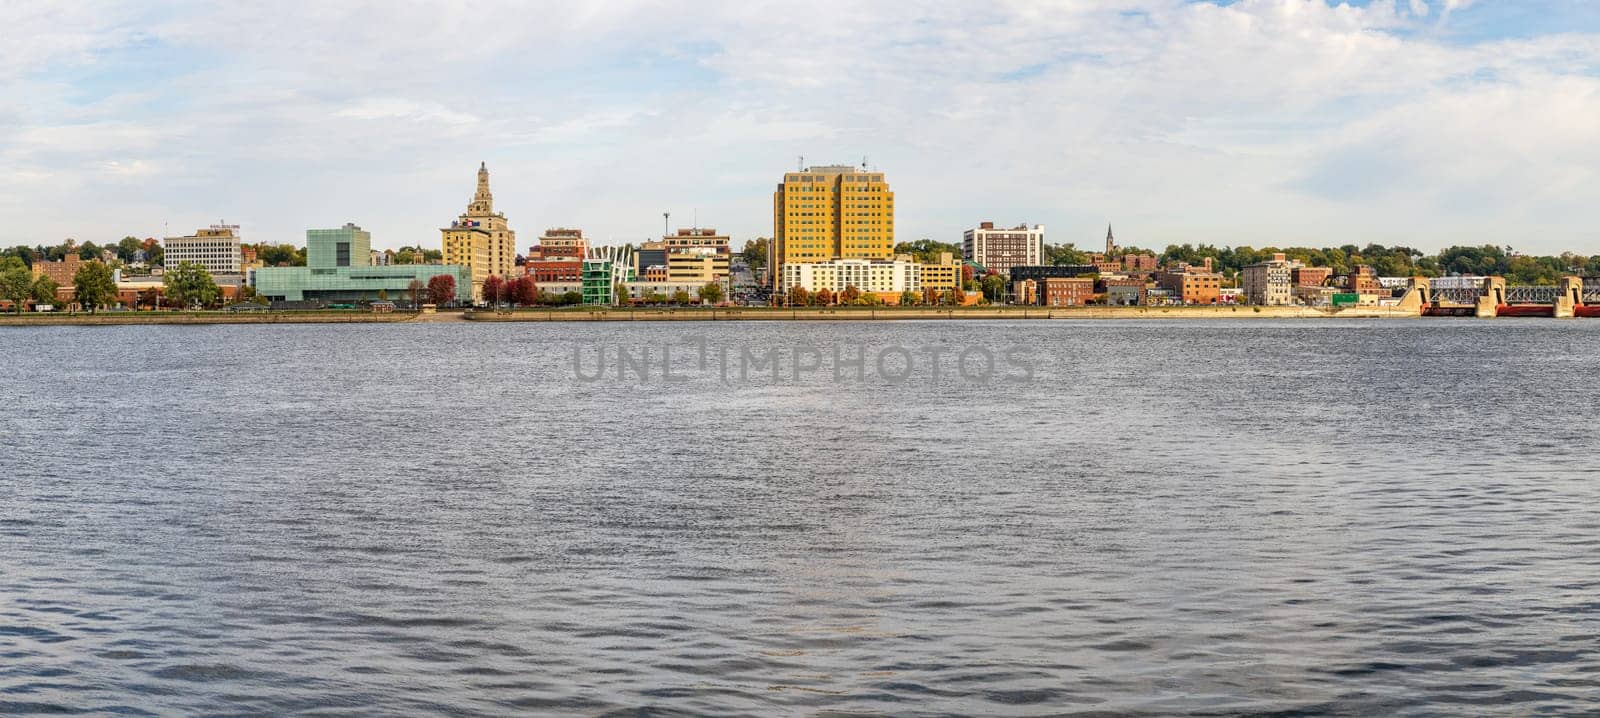 Cityscape of downtown area of Davenport IA by steheap